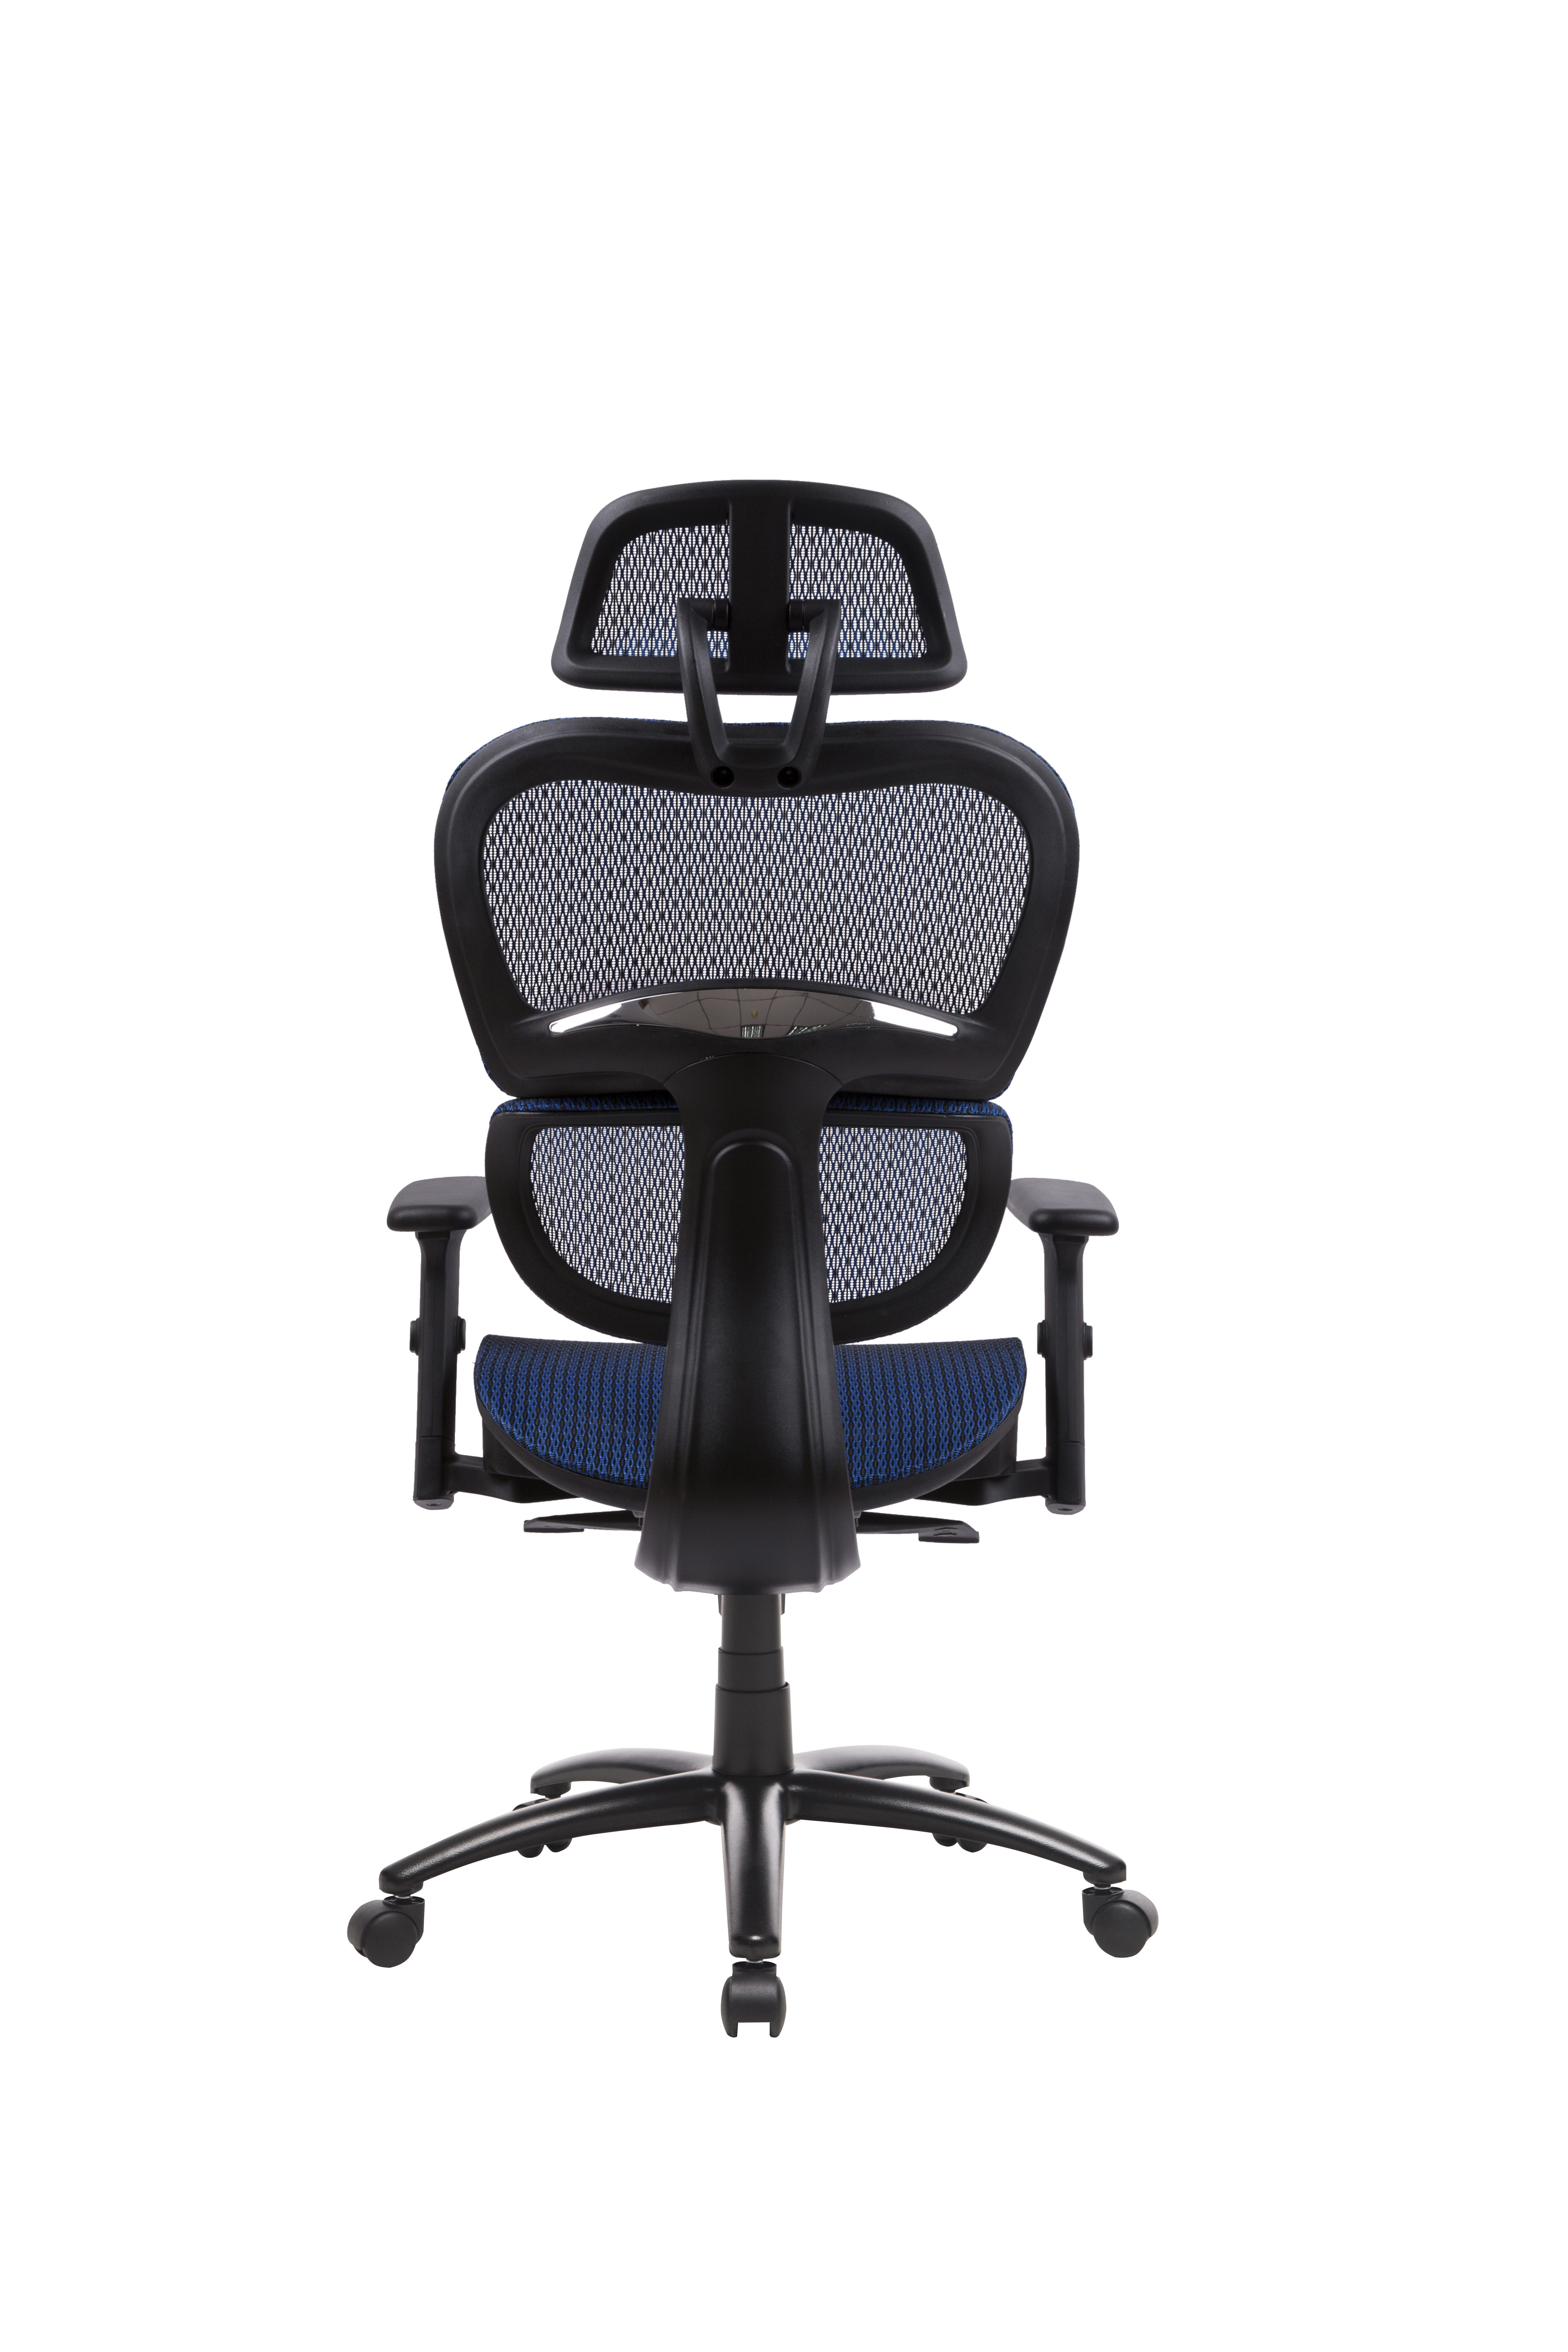 Ergonomic Office Chair Mesh Chair Computer Chair Desk Chair High Back Chair with Adjustable Headrest and Armrest-blue